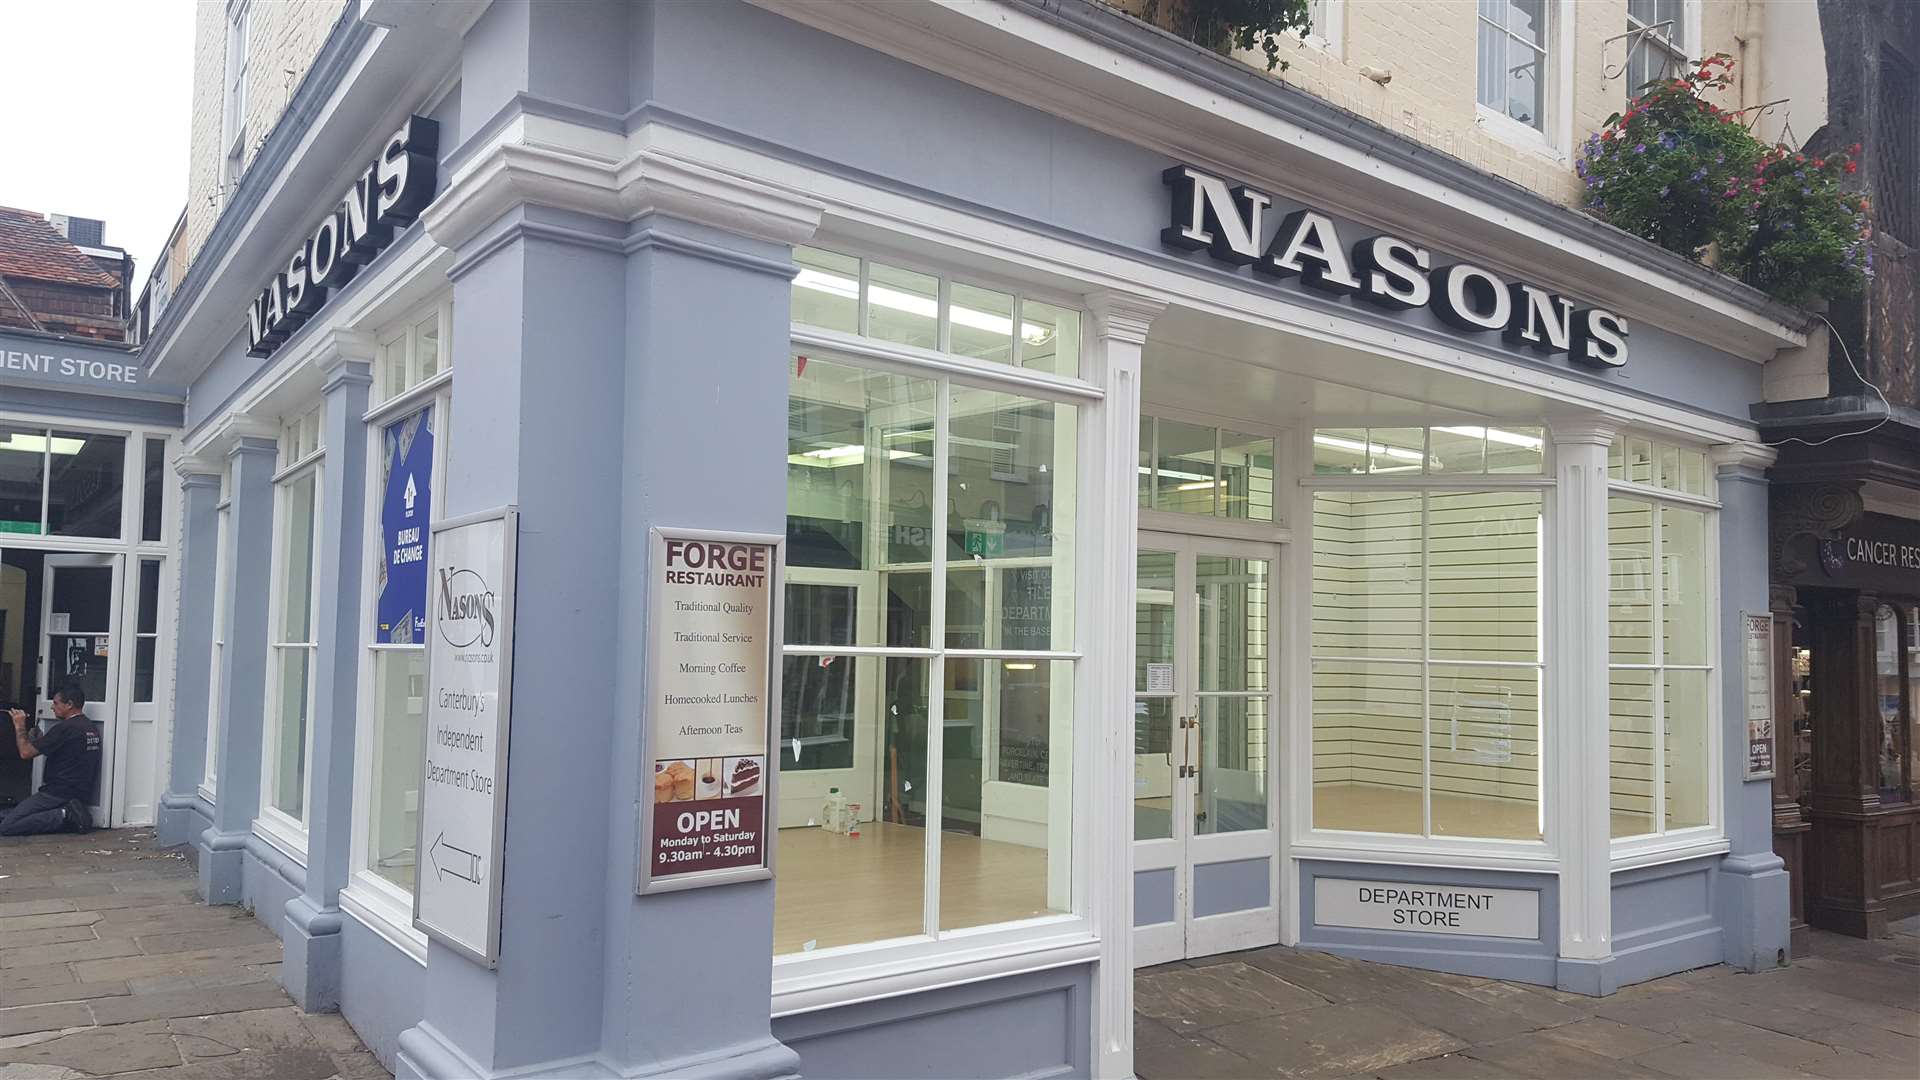 Nasons is now empty after closing down on Saturday, September 8